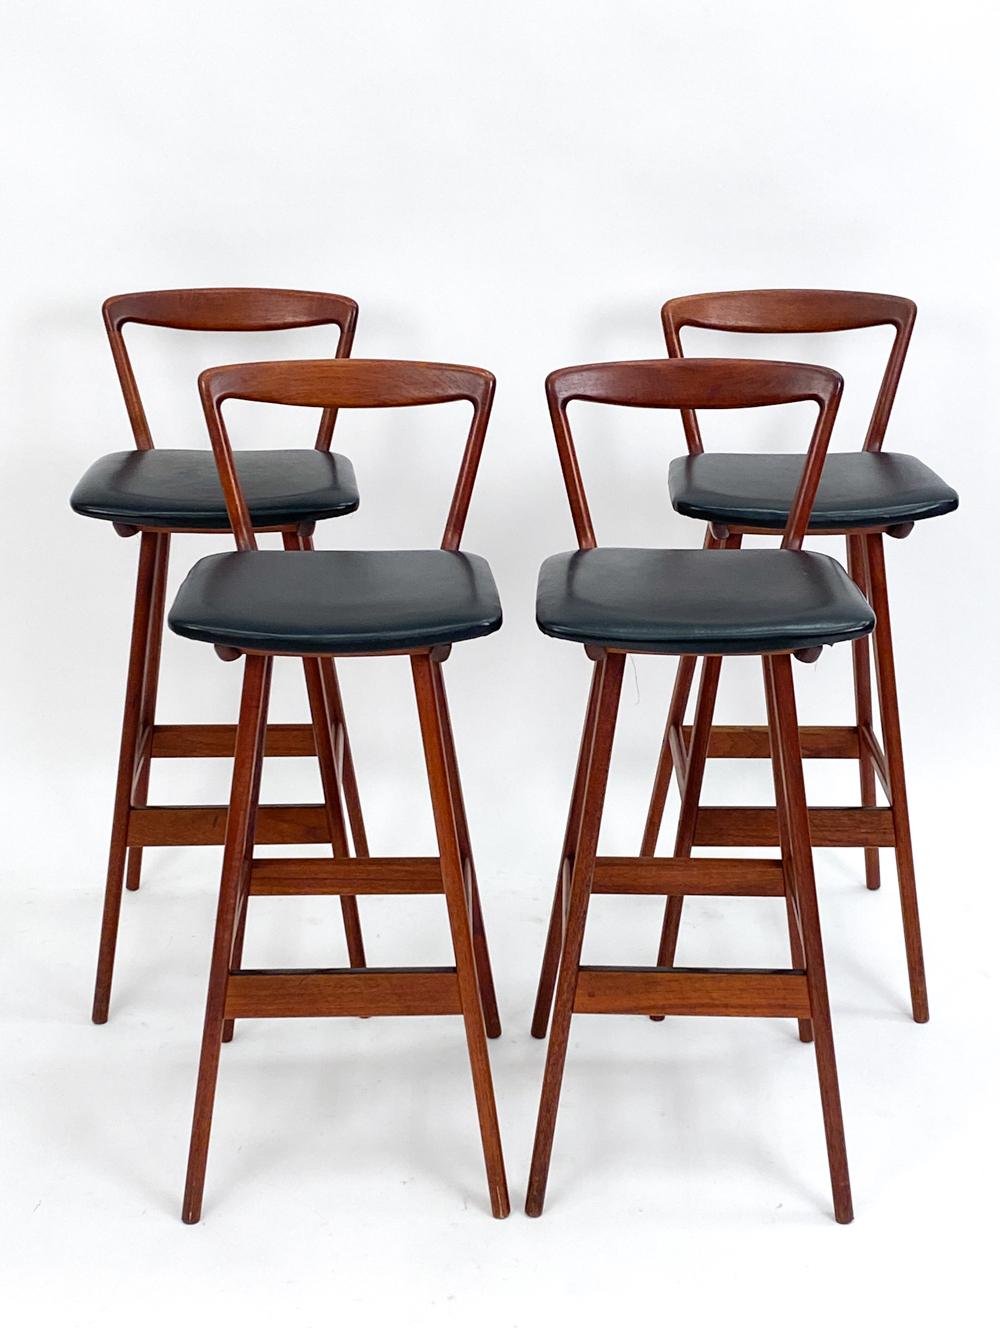 Welcome a fusion of craftsmanship and design elegance with this stunning set of Model 43 bar stools, masterfully conceived by Henry Rosengren Hansen for the celebrated Brande Mobelfabrik. These stools are more than mere seating—they are emblems of